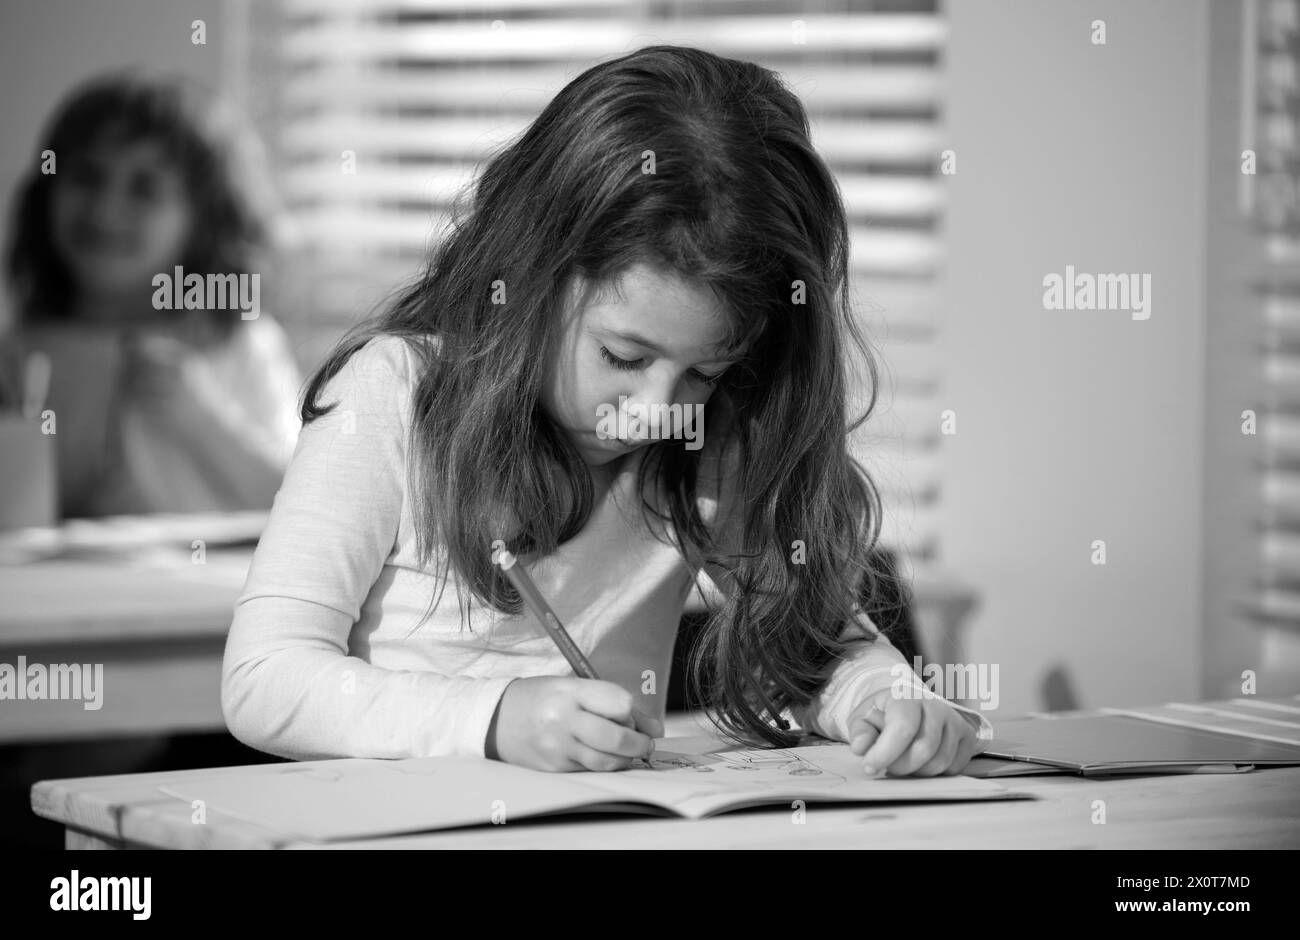 Concentrated schoolgirl sitting at desk and writing in exercise book with classmate sitting behind. Stock Photo